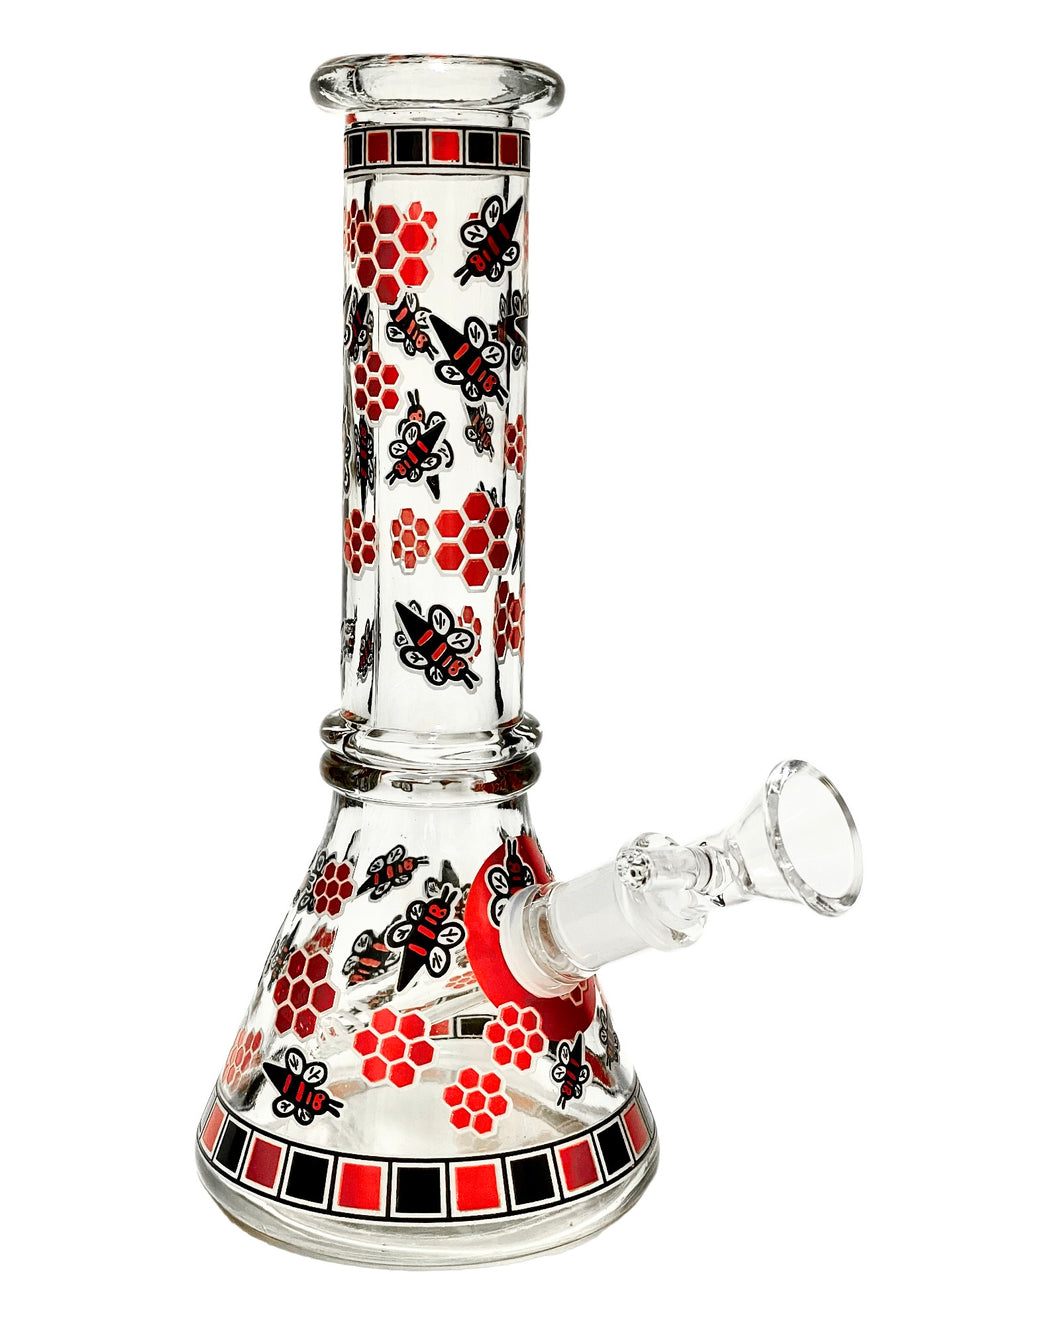 A Black and Red Beehive Beaker Bong.